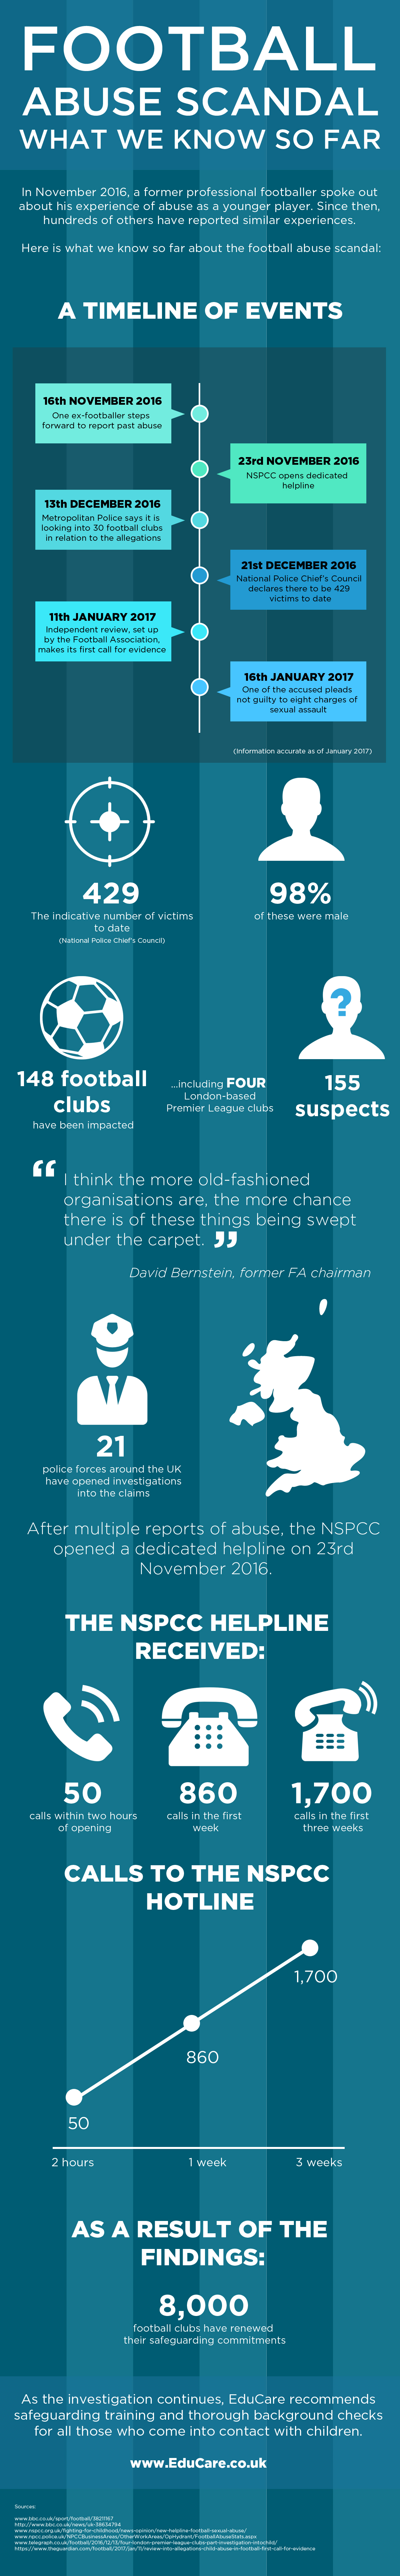 Infographic about the football abuse scandal in the UK